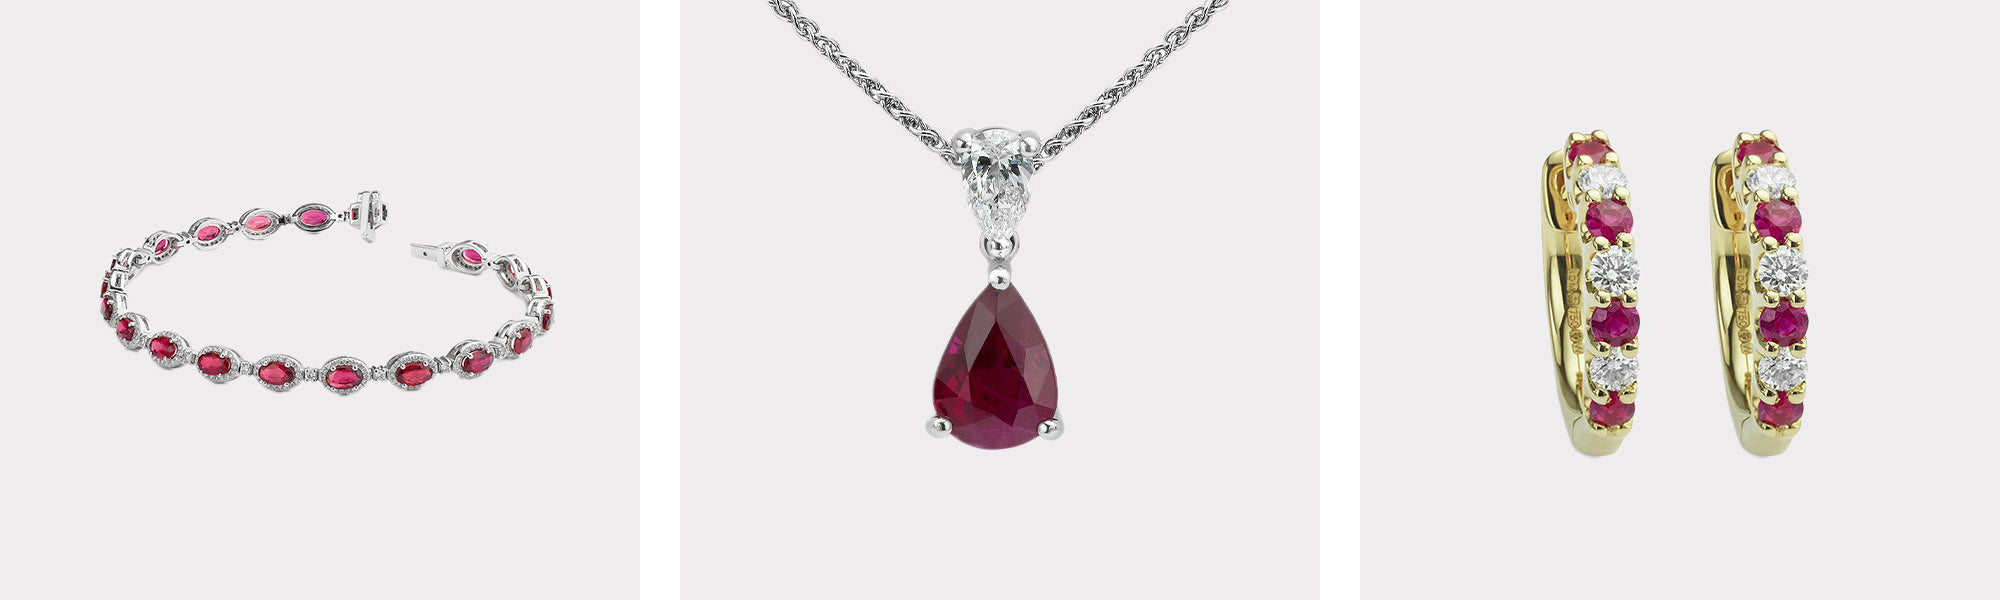 Ruby Jewellery at Deacons Jewellers